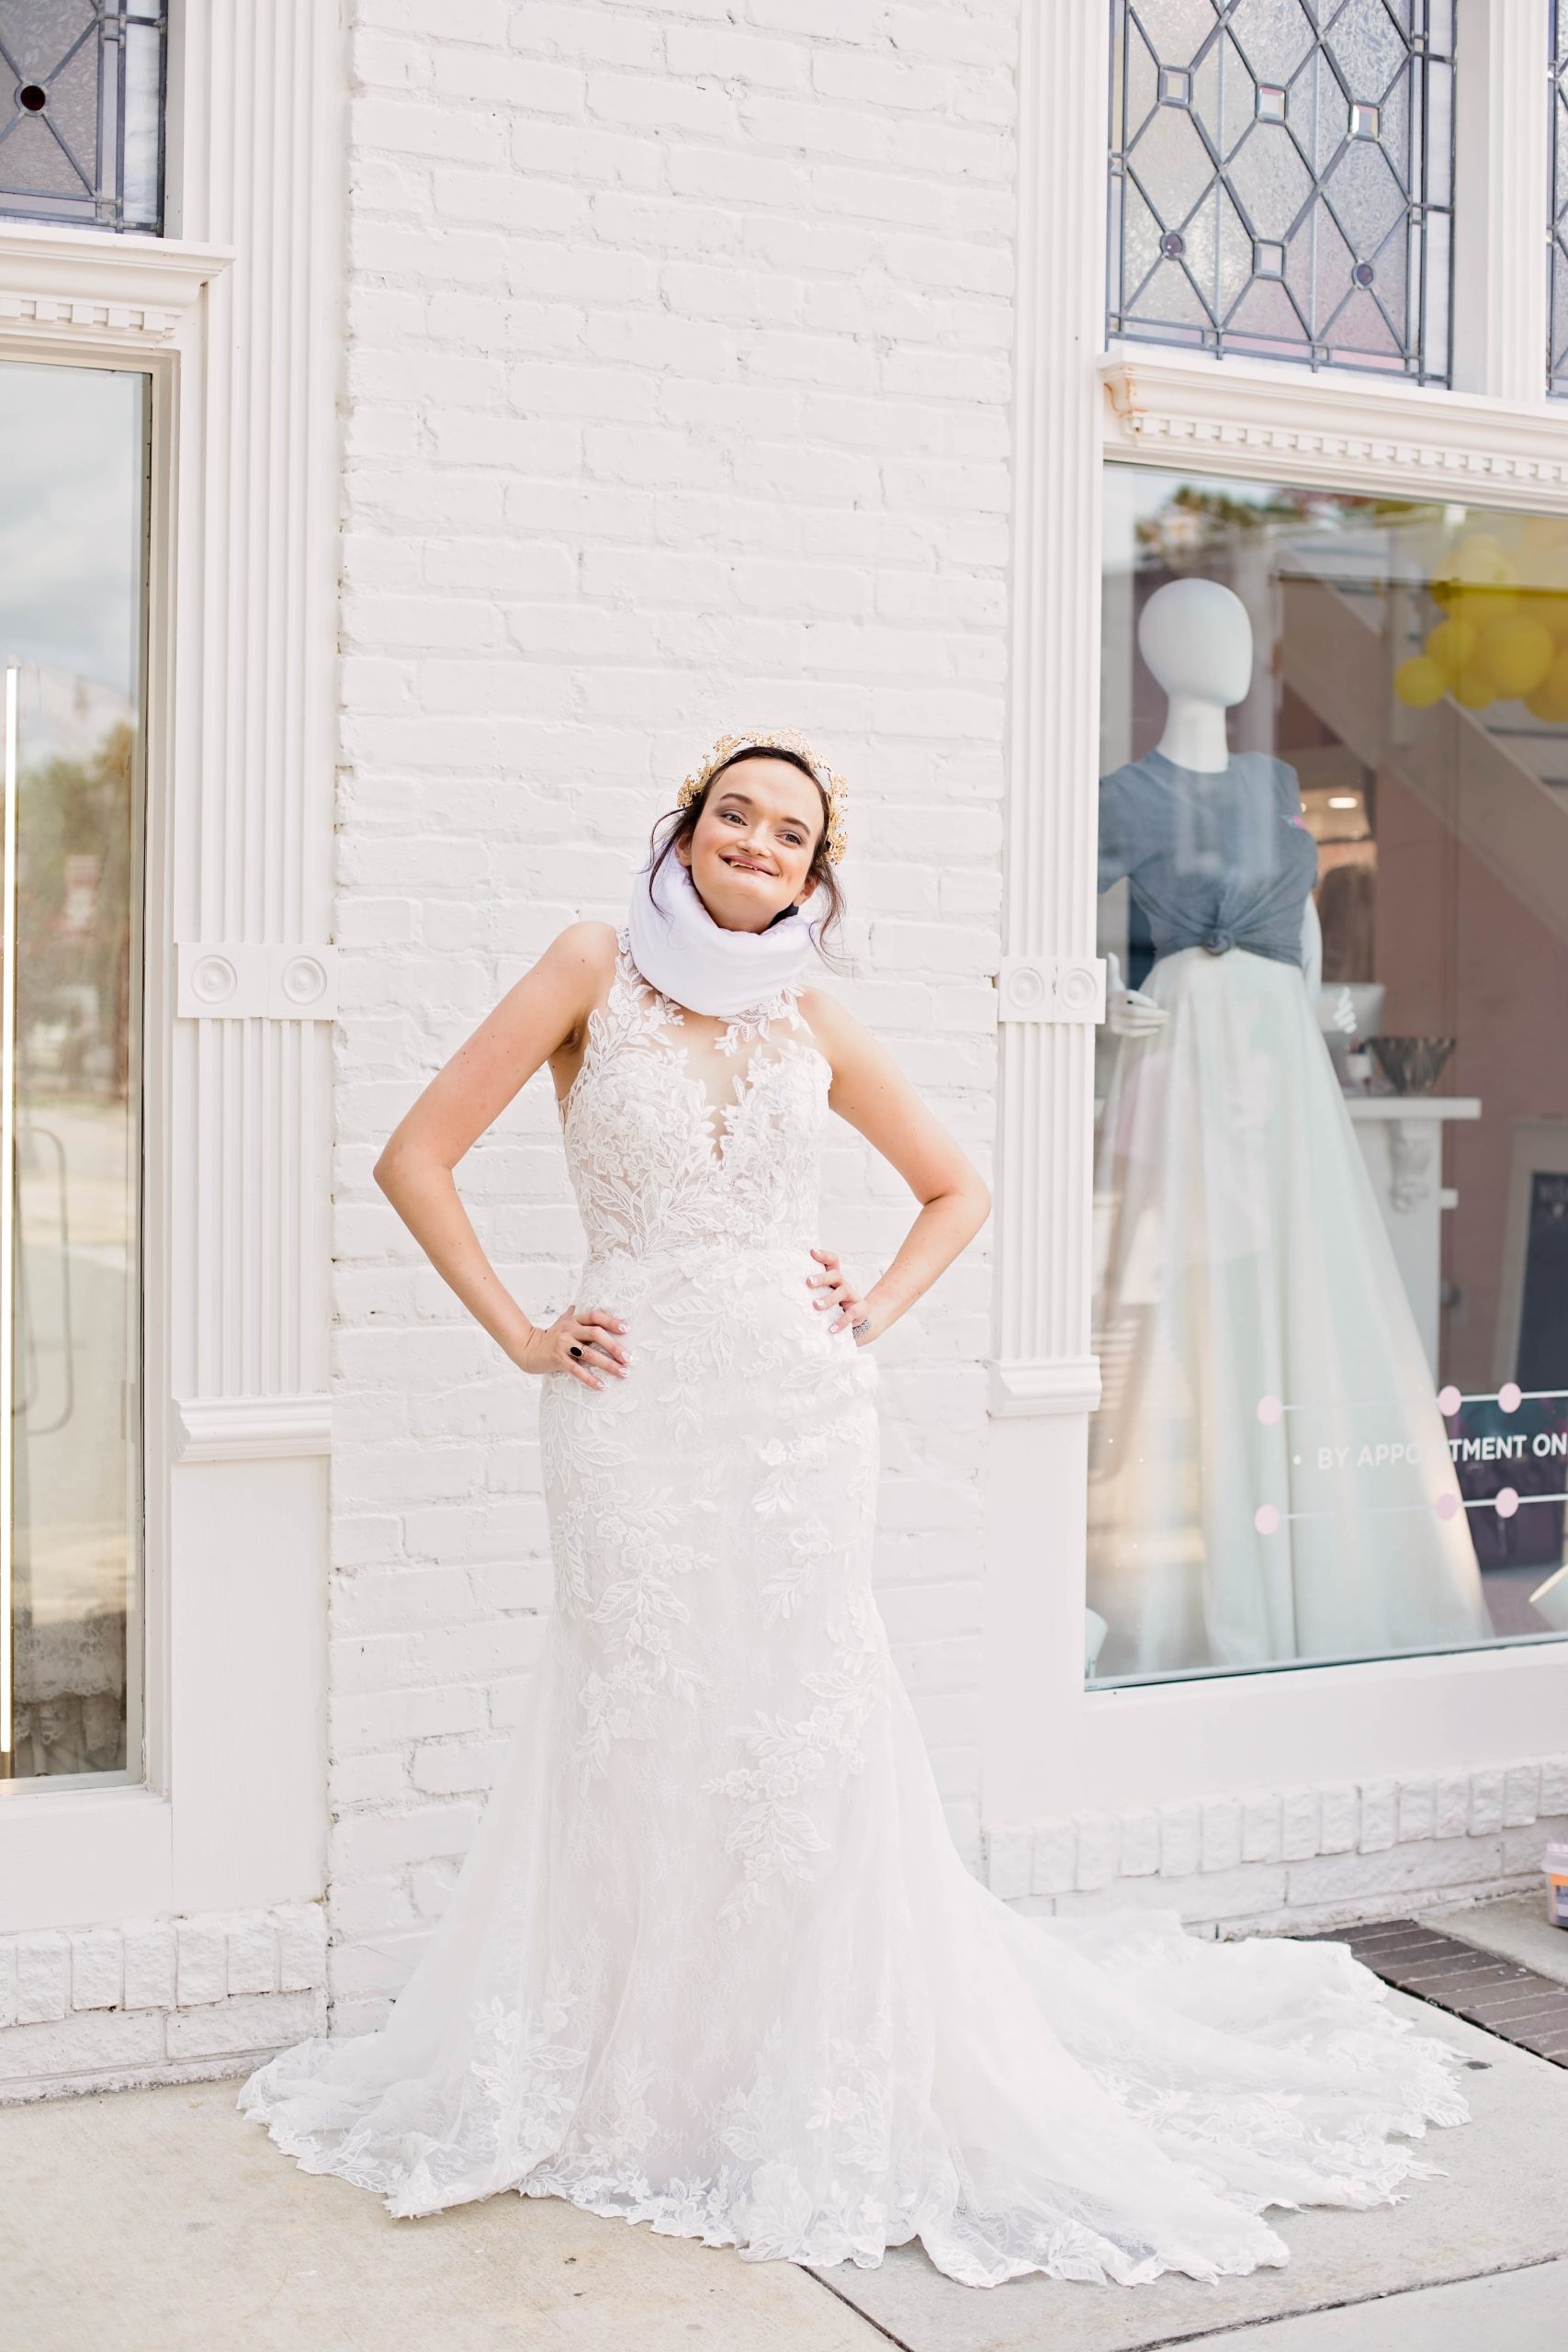 Bride With Cerebral Palsy Wearing Lace Wedding Dress Called Kern By Maggie Sottero For All Bodies All Brides